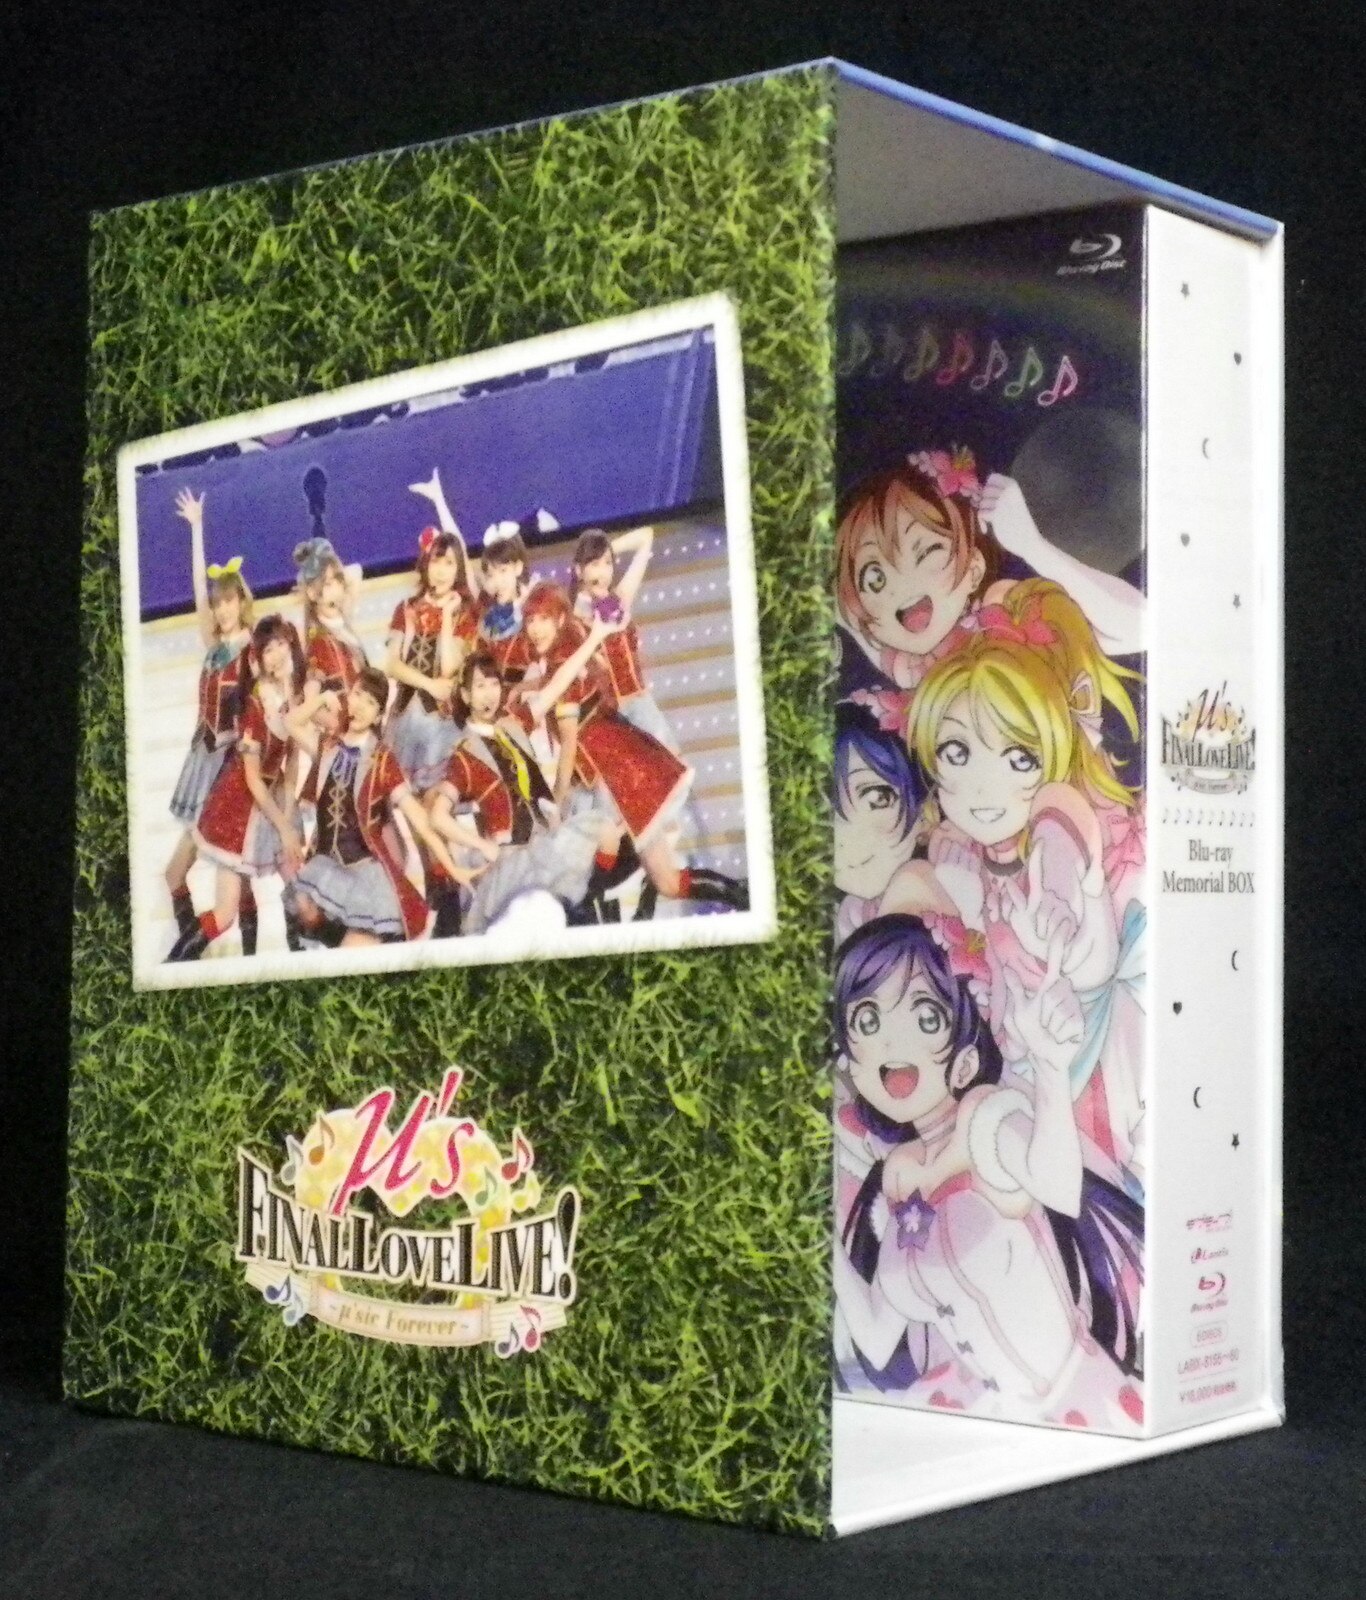 Live Blu-ray Amazon Limited Edition Love Live ! μ's (Muse) Final LoveLive!  Blu-ray Memorial BOX | Mandarake Online Shop